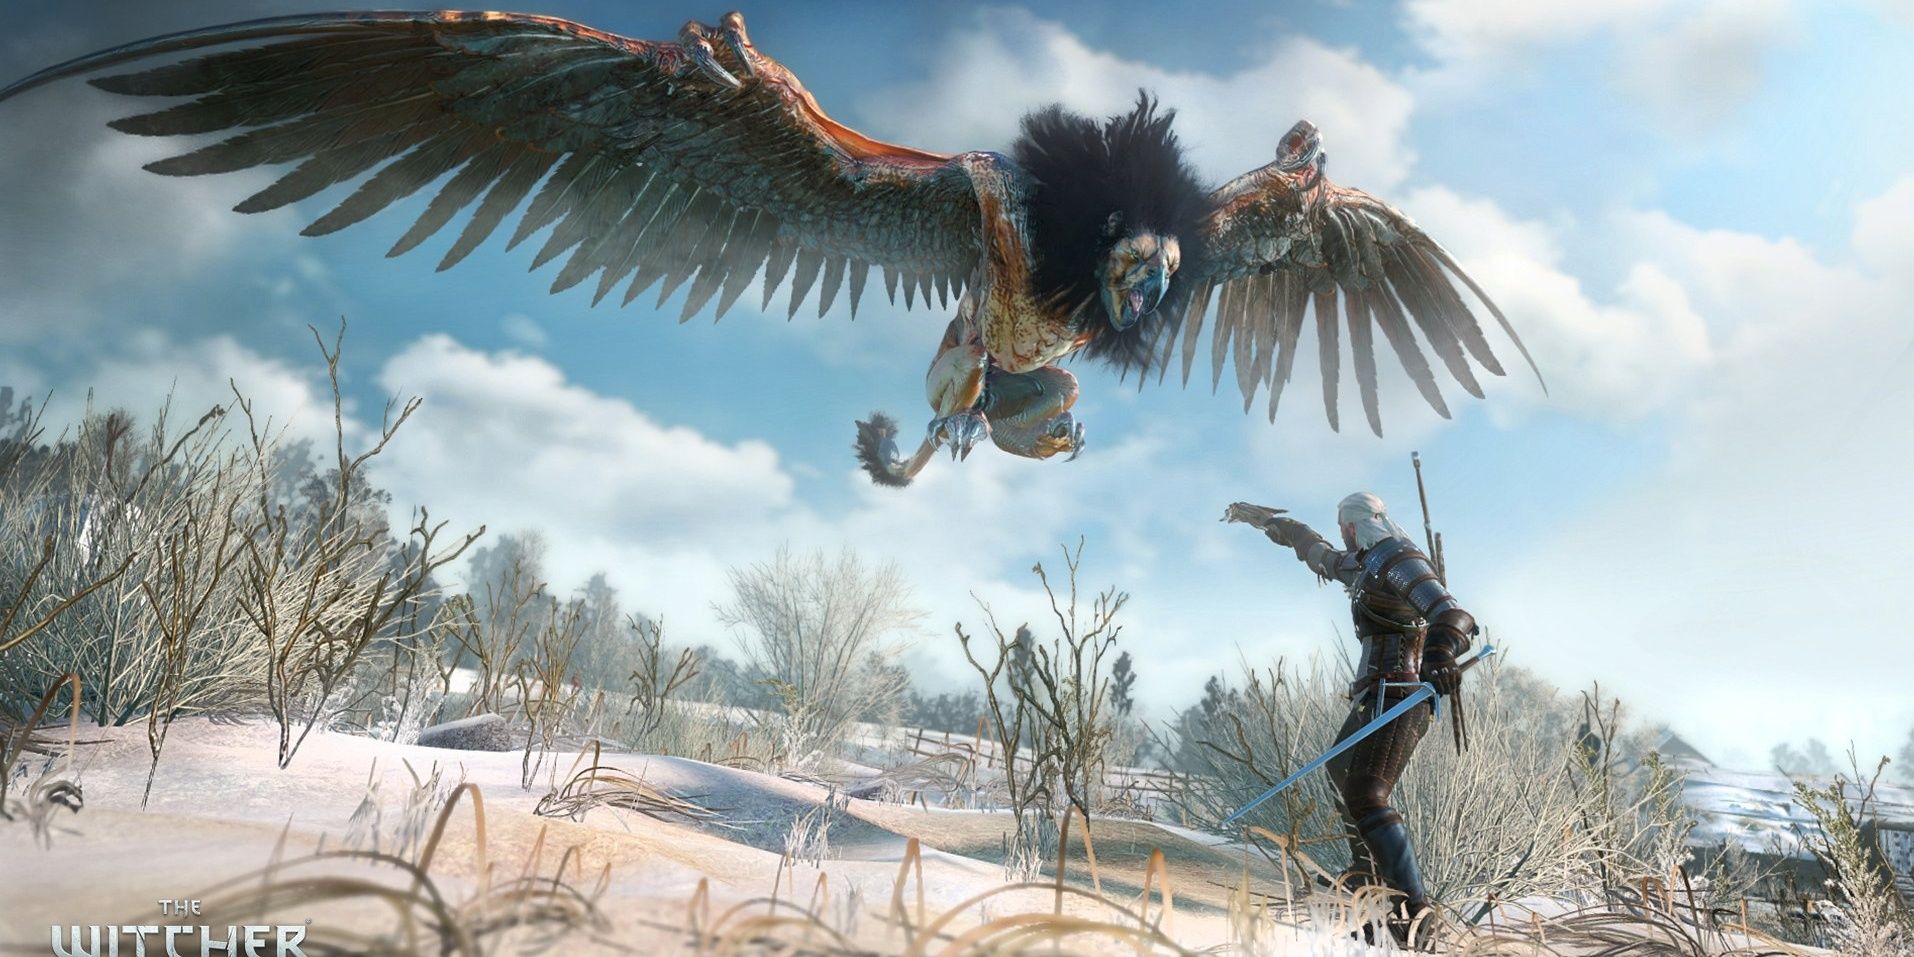 The Witcher 3 Griffin Fight